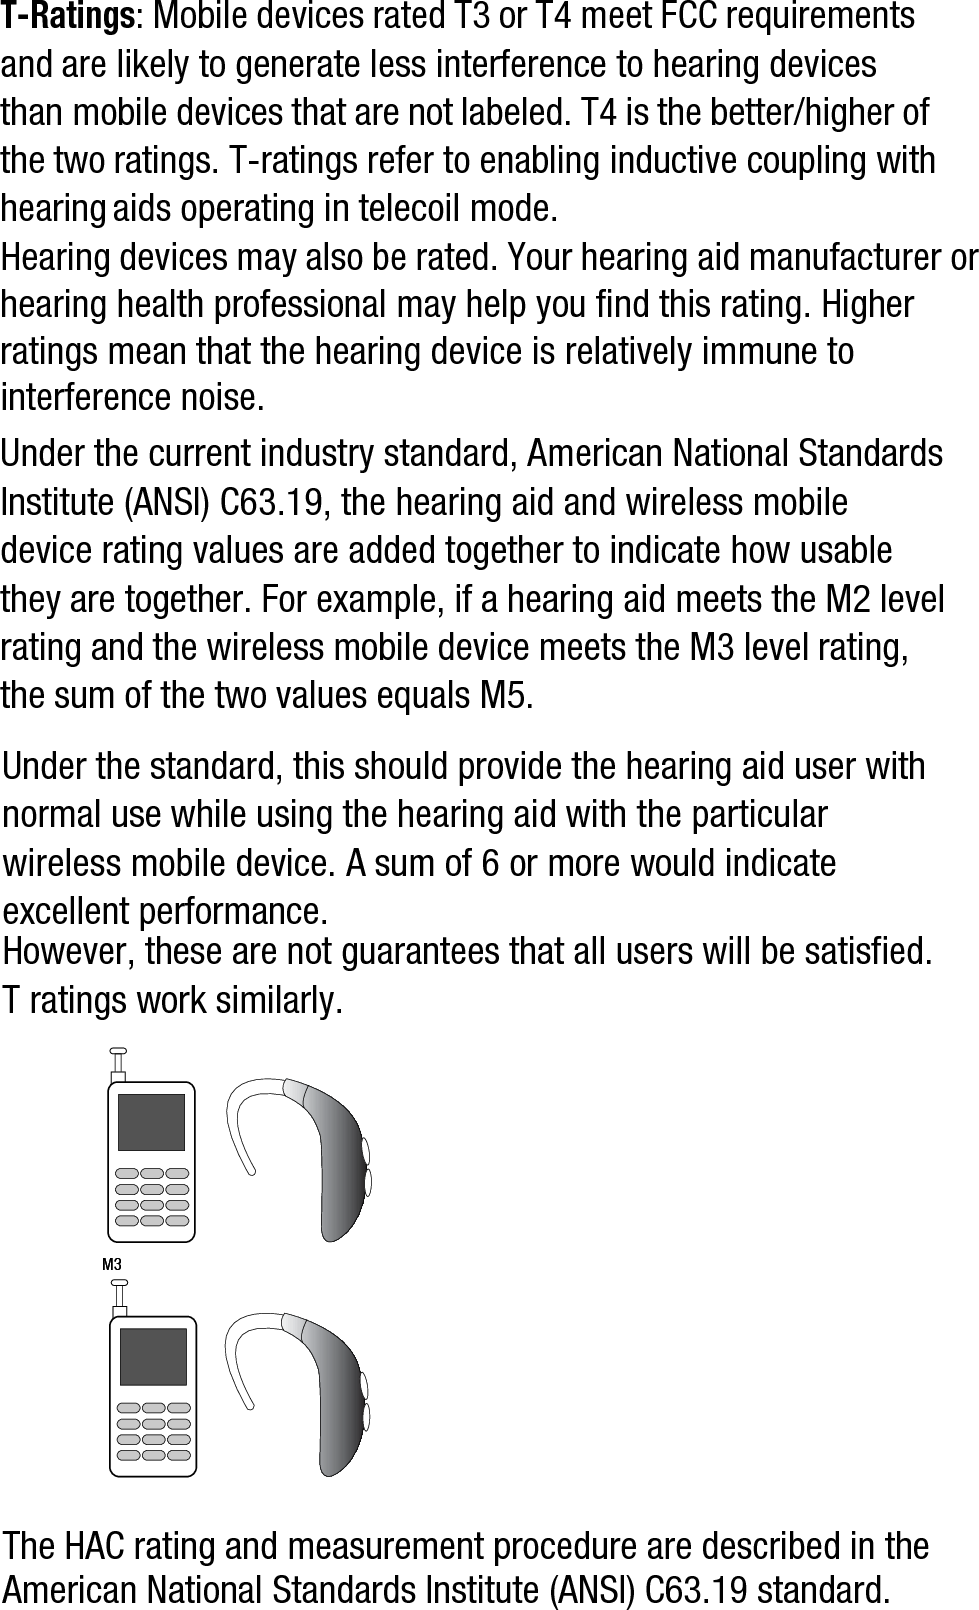 T-Ratings: Mobile devices rated T3 or T4 meet FCC requirements and are likely to generate less interference to hearing devices than mobile devices that are not labeled. T4 is the better/higher of the two ratings. T-ratings refer to enabling inductive coupling with hearing aids operating in telecoil mode.Hearing devices may also be rated. Your hearing aid manufacturer or hearing health professional may help you find this rating. Higher ratings mean that the hearing device is relatively immune to interference noise. Under the current industry standard, American National Standards Institute (ANSI) C63.19, the hearing aid and wireless mobile device rating values are added together to indicate how usable they are together. For example, if a hearing aid meets the M2 level rating and the wireless mobile device meets the M3 level rating, the sum of the two values equals M5. Under the standard, this should provide the hearing aid user with normal use while using the hearing aid with the particular wireless mobile device. A sum of 6 or more would indicate excellent performance.  However, these are not guarantees that all users will be satisfied. T ratings work similarly.The HAC rating and measurement procedure are described in the American National Standards Institute (ANSI) C63.19 standard.M3       M3